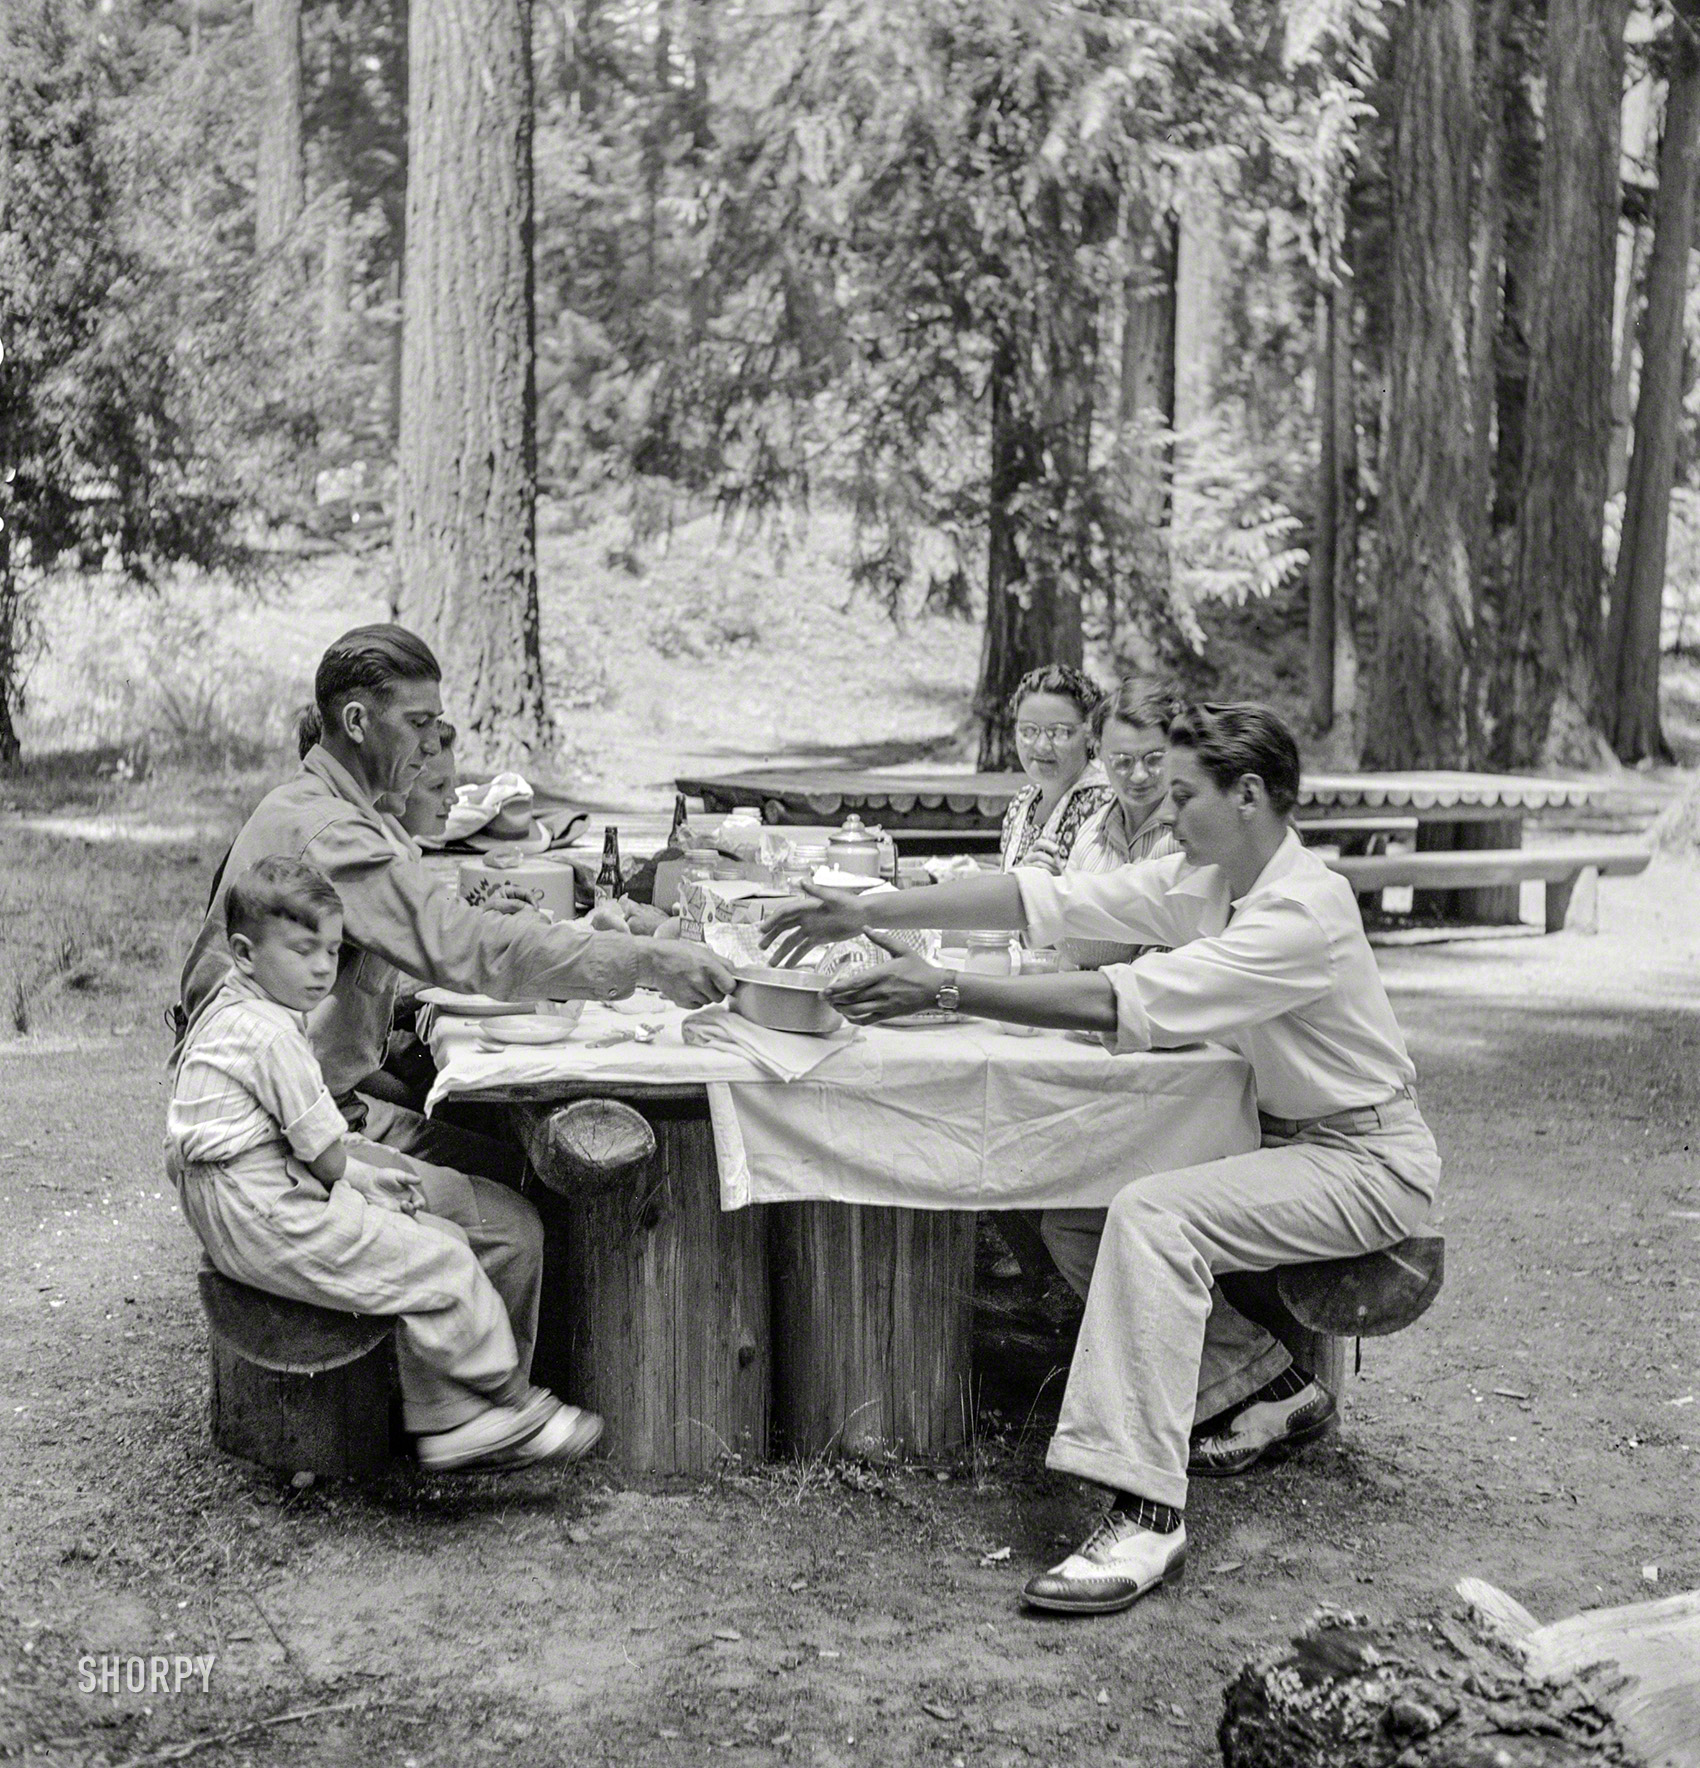 July 1942. "Klamath Falls, Oregon. Picnickers in city park." Medium format nitrate negative by Russell Lee for the Office of War Information. View full size.